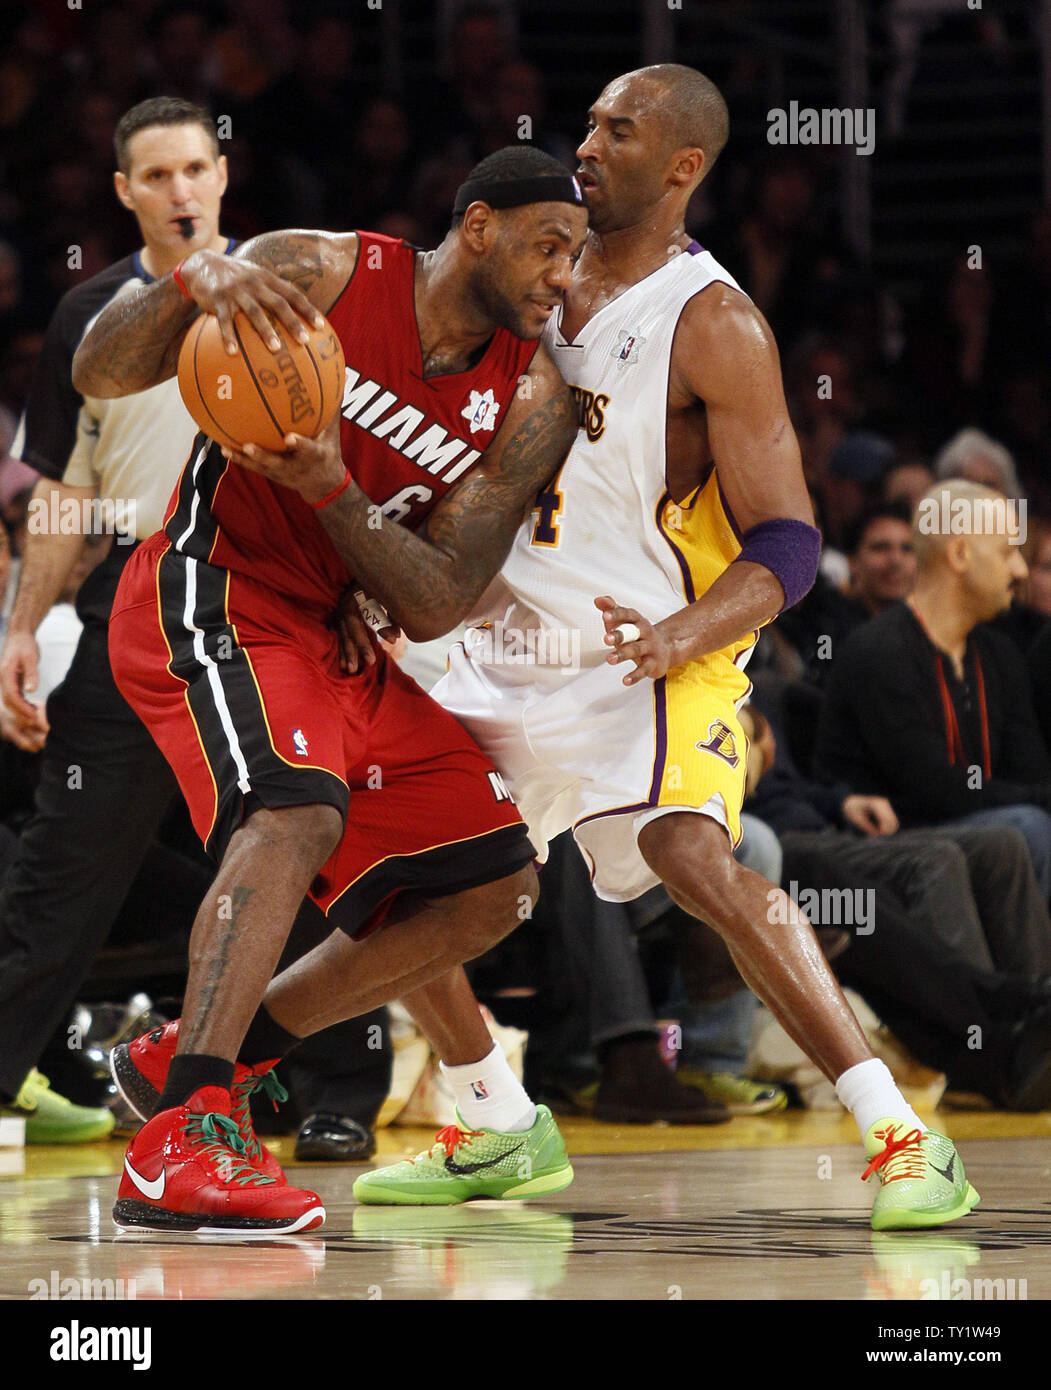 Miami Heat small forward LeBron James (6) and Los Angeles Lakers shooting guard Kobe Bryant (24) in the second half of  their NBA basketball game in Los Angeles on December  25, 2010.   UPI/Lori Shepler Stock Photo